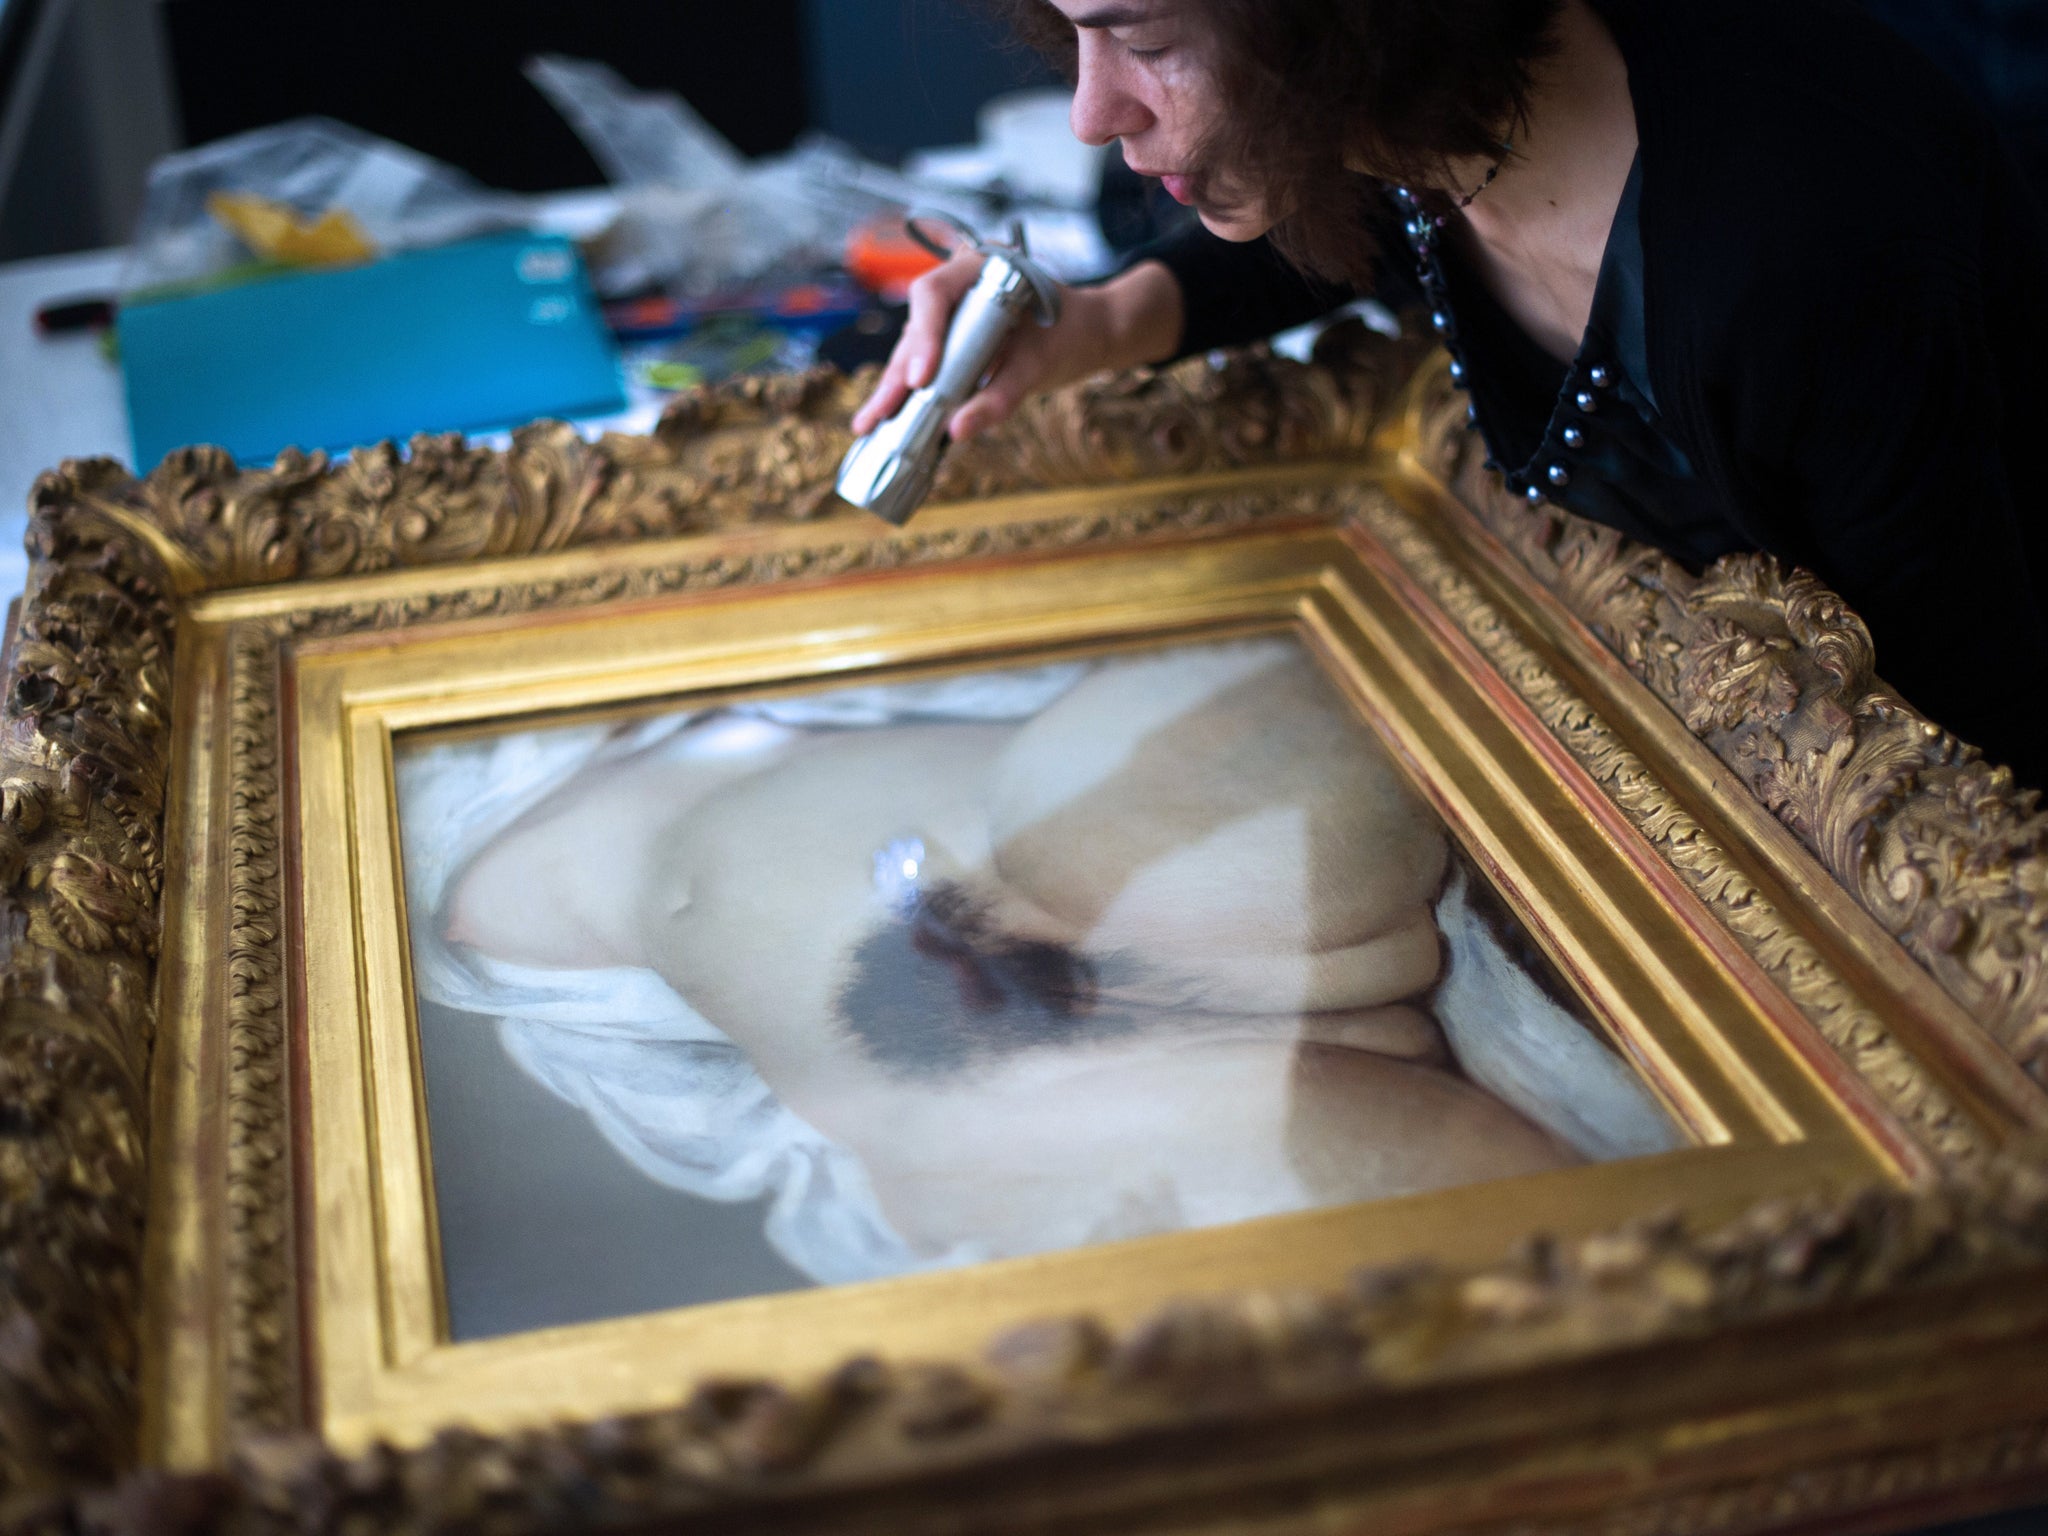 A woman examines the Gustave Courbet's canvas 'L'origine du monde' (The origin of the world) before its installation at the Courbet museum on June 3, 2014, in Ornans, eastern France